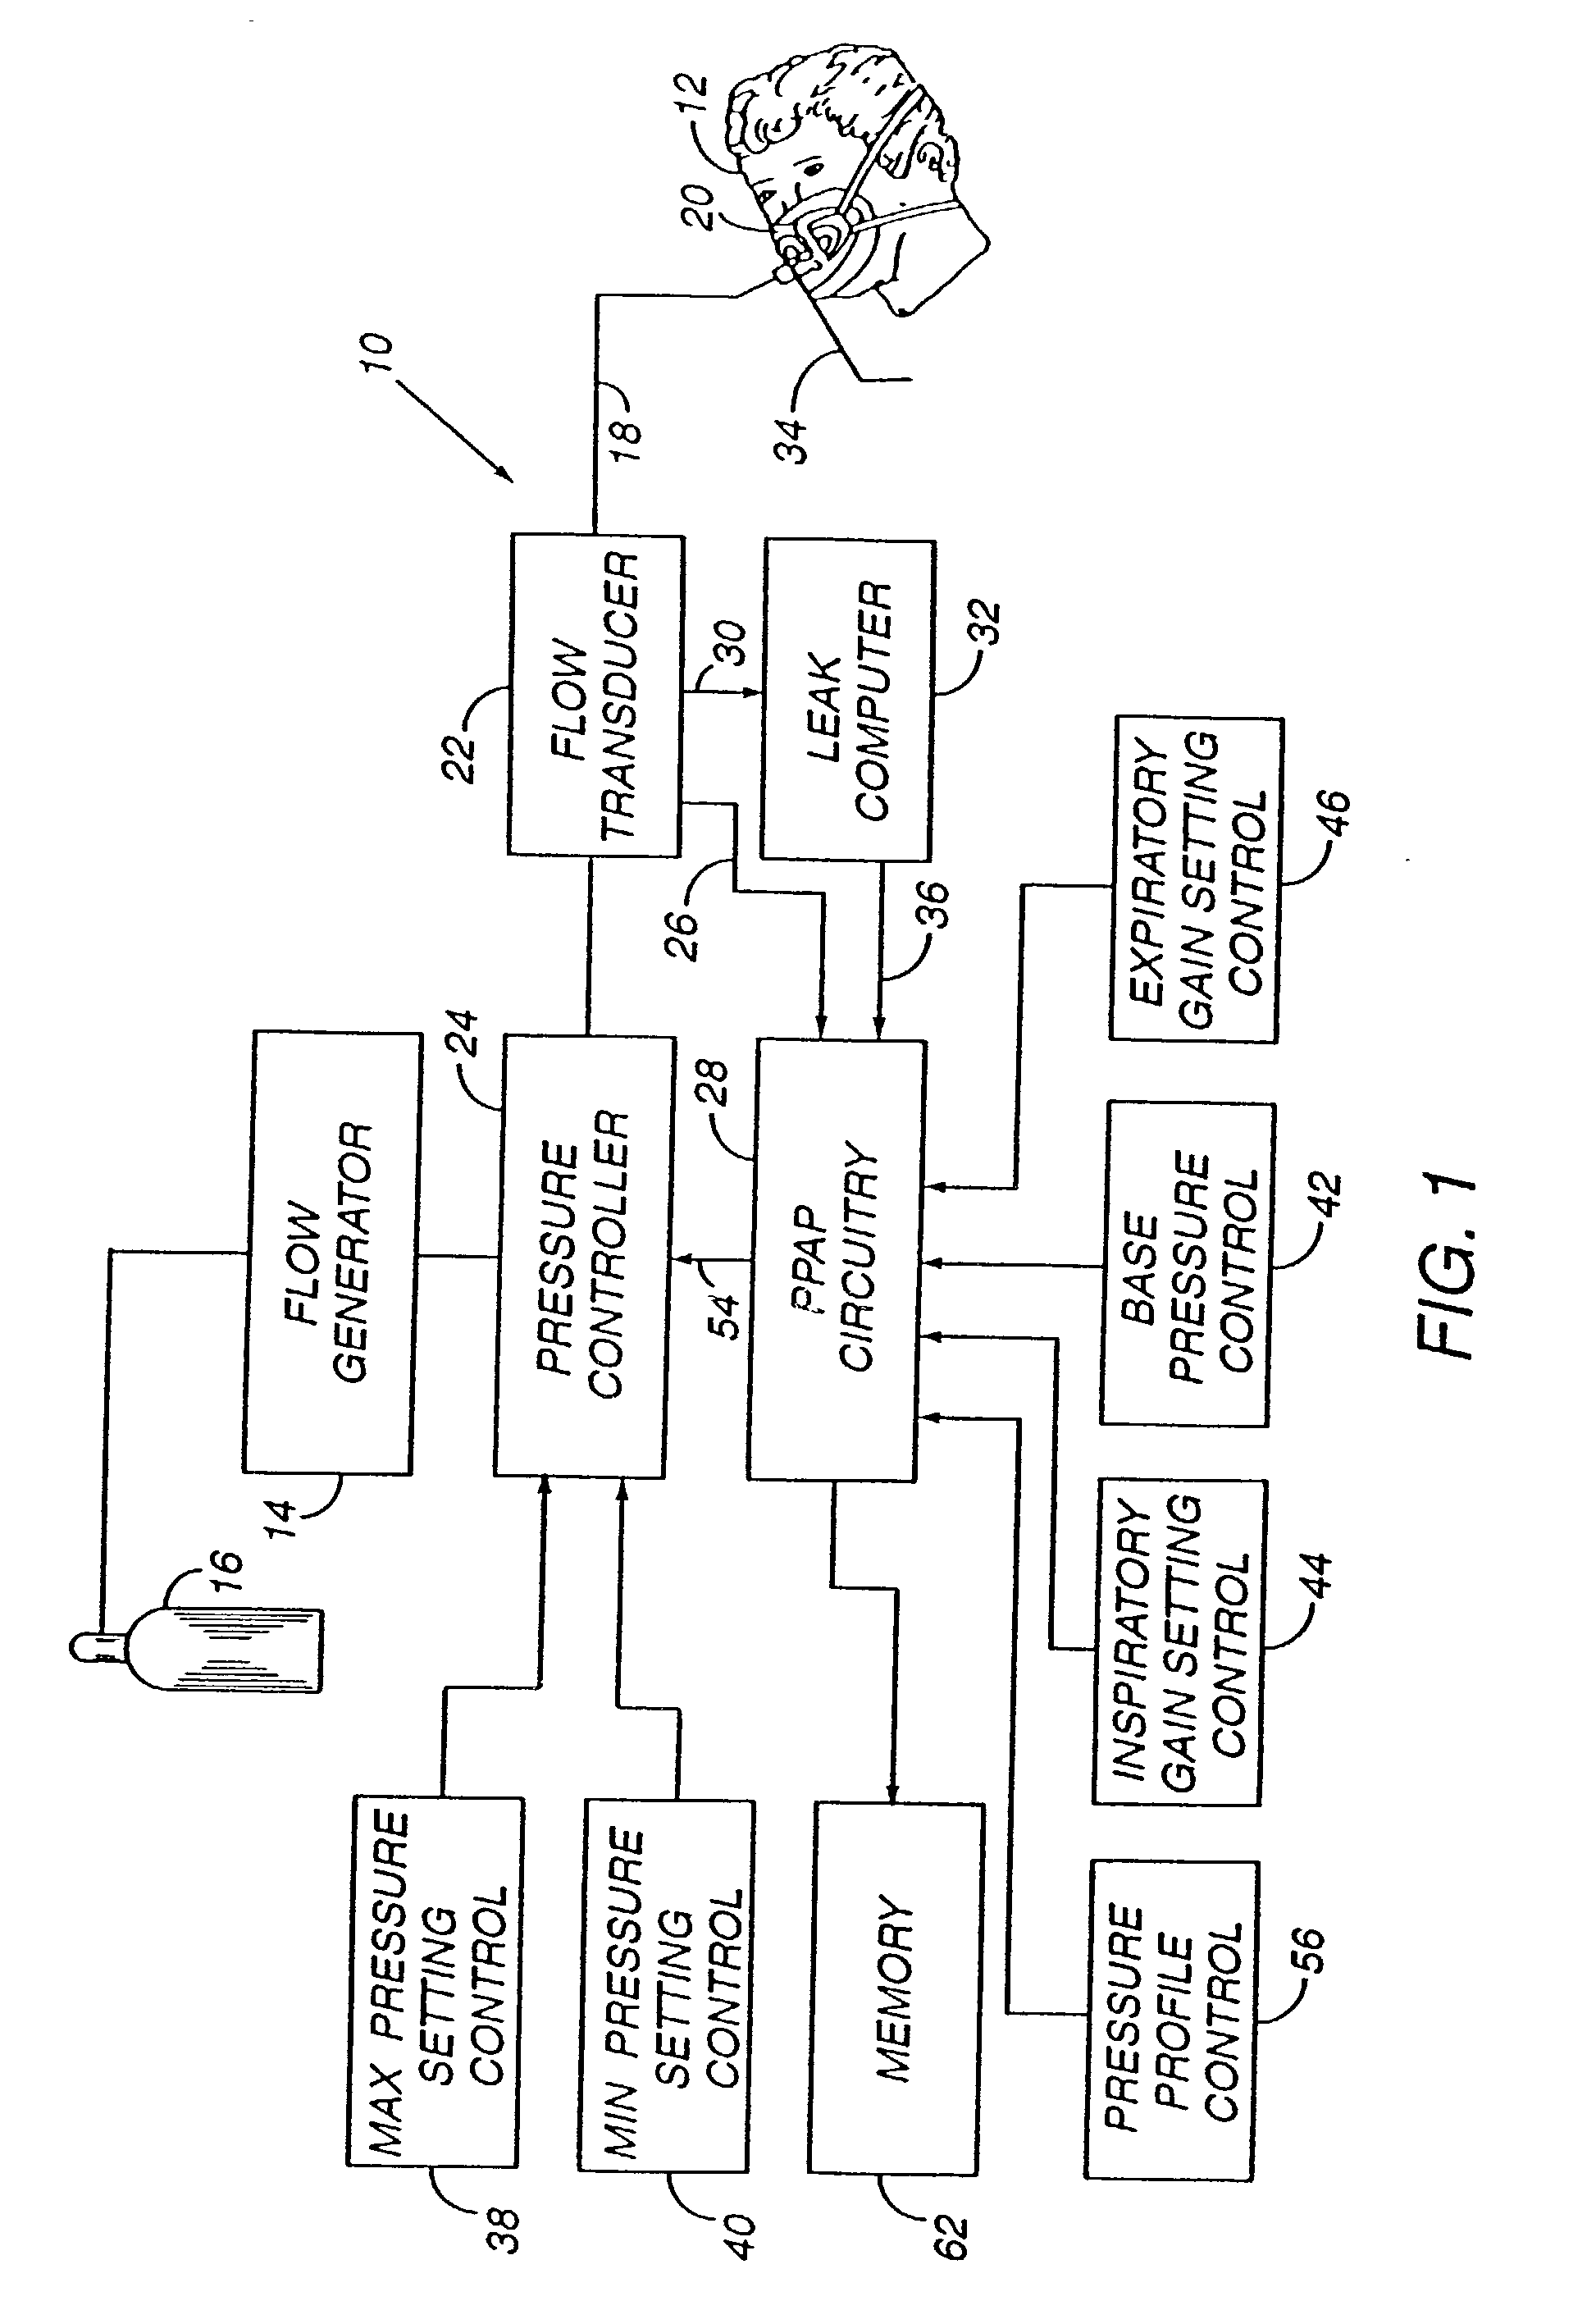 Method and apparatus for providing positive airway pressure to a patient